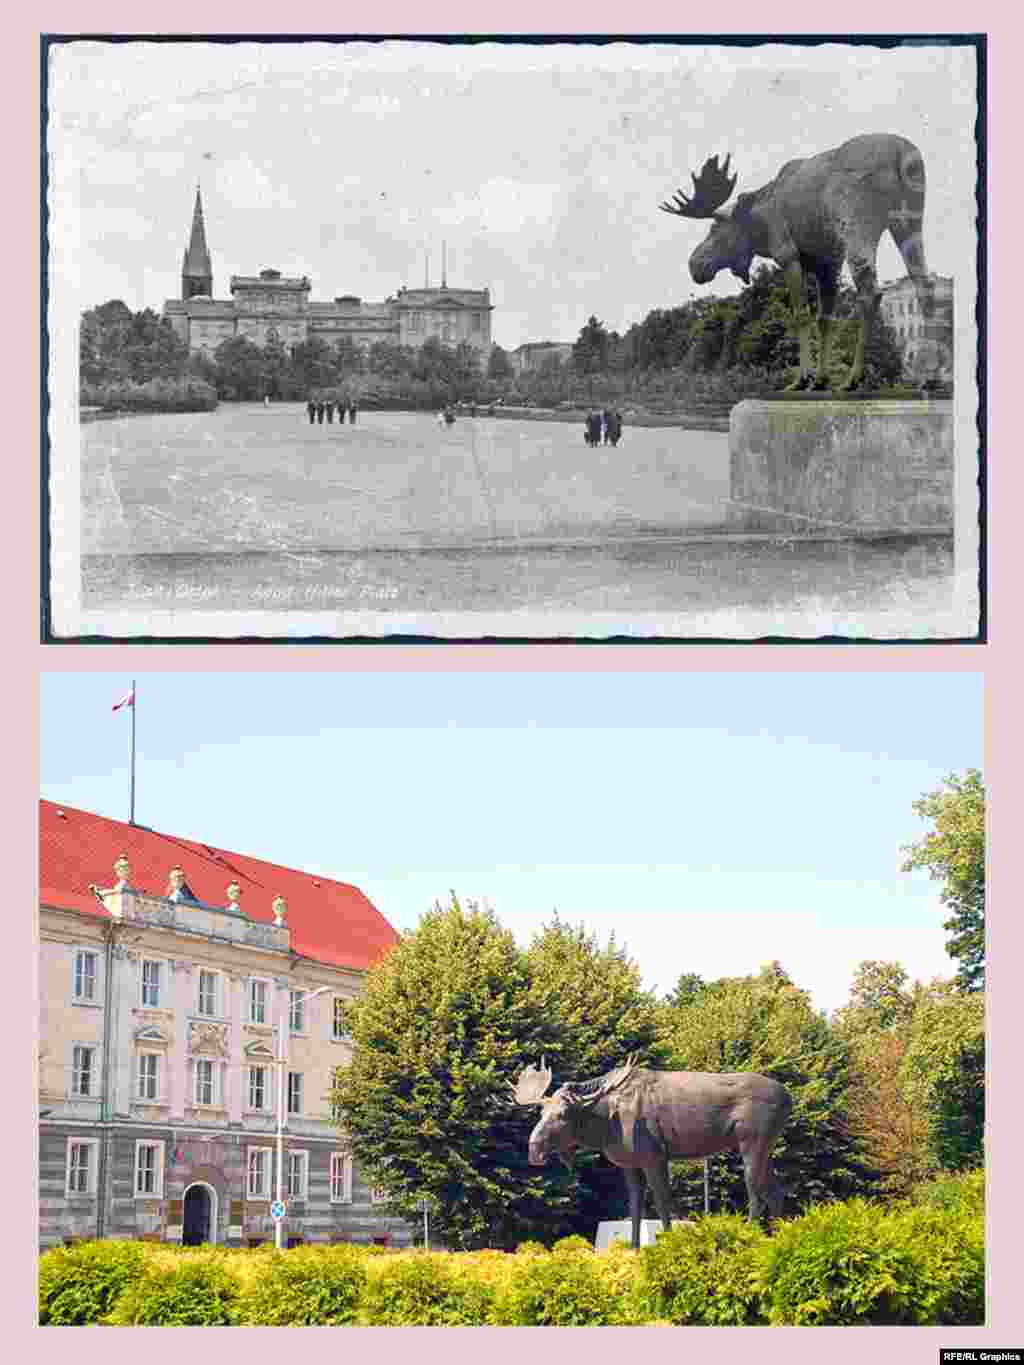 Sovetsk (fomerly Tilsit). The caption on the postcard reads: &ldquo;Tilsit, Eastern Prussia. Adolf Hitler Square.&rdquo; Before it was named for Hitler, the square had been called Anger Platz. Today it is Theatre Square.&nbsp; The Bronze sculpture of a moose by Berlin&rsquo;s Ludwig Vordermayer was unveiled on June 29, 1928. The moose quickly became a symbol of Tilsit. In 1947, the sculpture was moved to the city park. A T-34 tank replaced it. Around the tank was a memorial and burial place for the Soviet soldiers who died liberating the town from Nazi German forces. In the 1950s, the sculpture was moved to the zoo in Kaliningrad. In 2007, after lengthy debates between the city of Kaliningrad and Sovetsk, the moose returned to Sovetsk and took a new spot in the park across from the city administration.&nbsp;